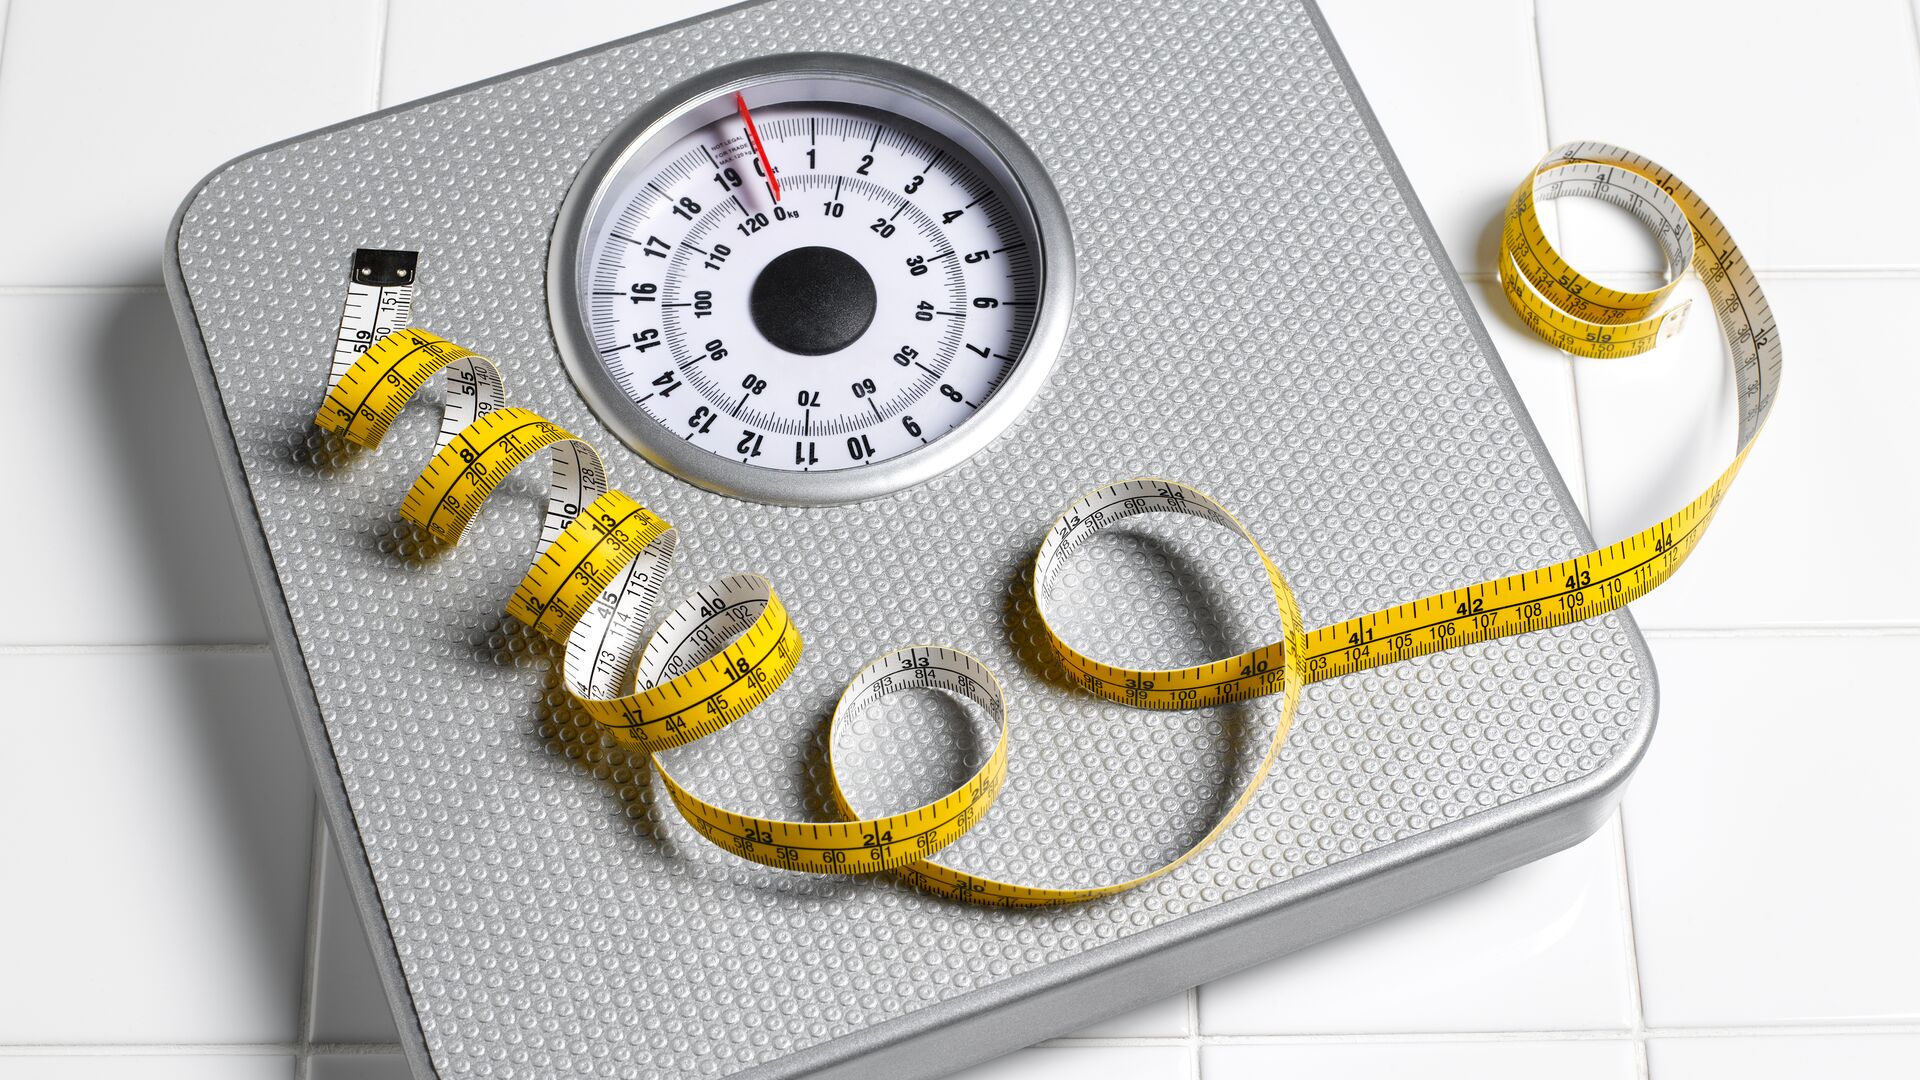 Representing research into Obesity drug market is a scale and an exhausted tape measure resting on the scale. Against a white background and the scale is old fashioned.